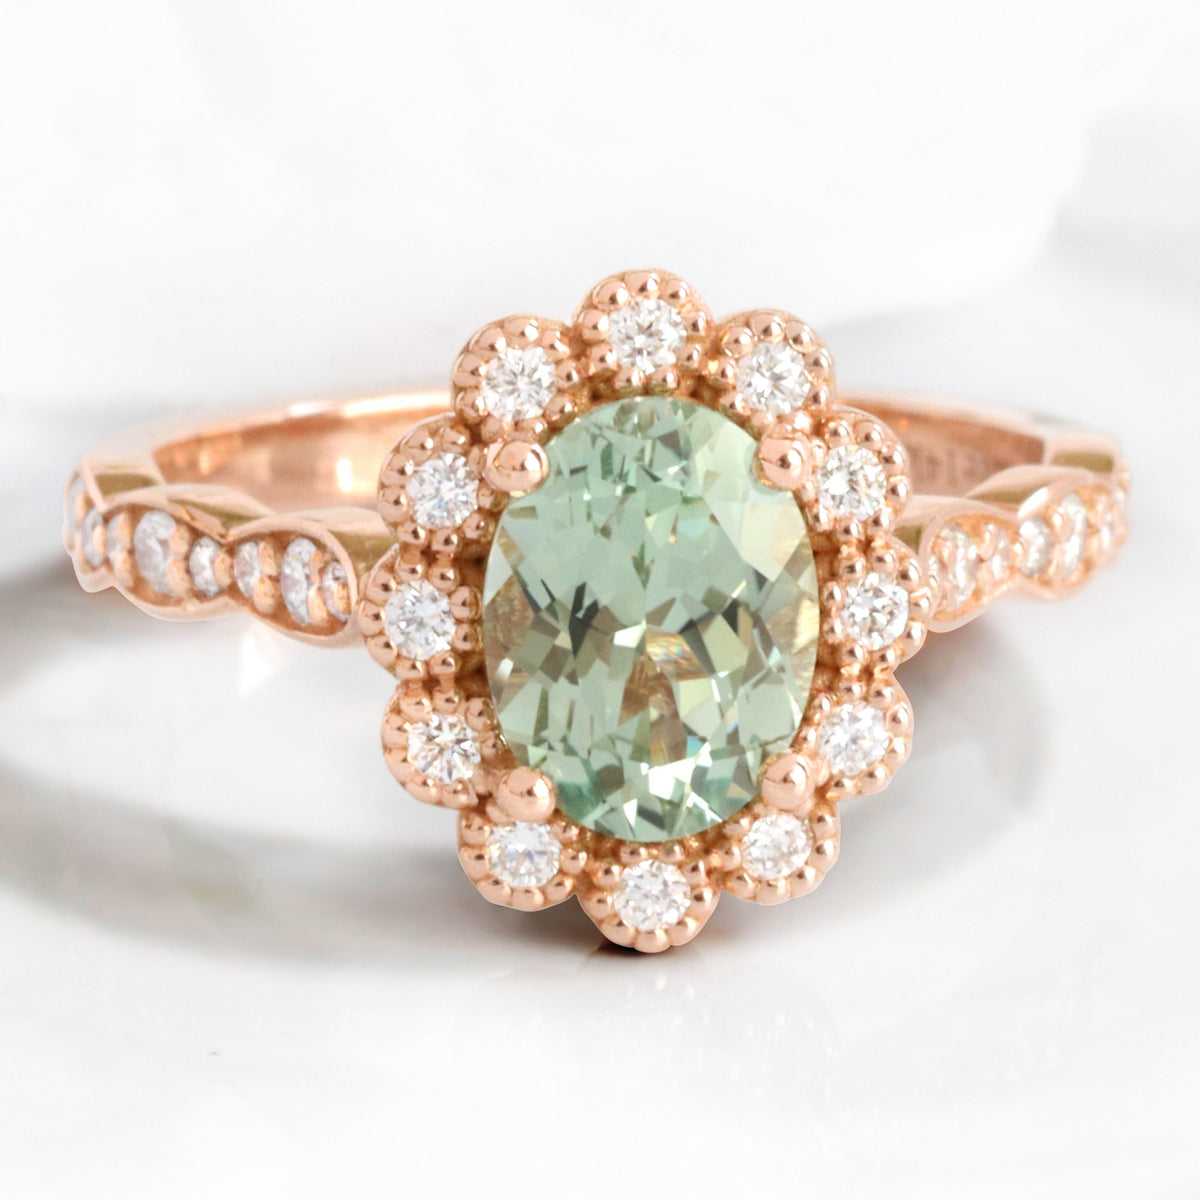 Oval seafoam green sapphire engagement ring rose gold vintage halo diamond sapphire ring la more design jewelry